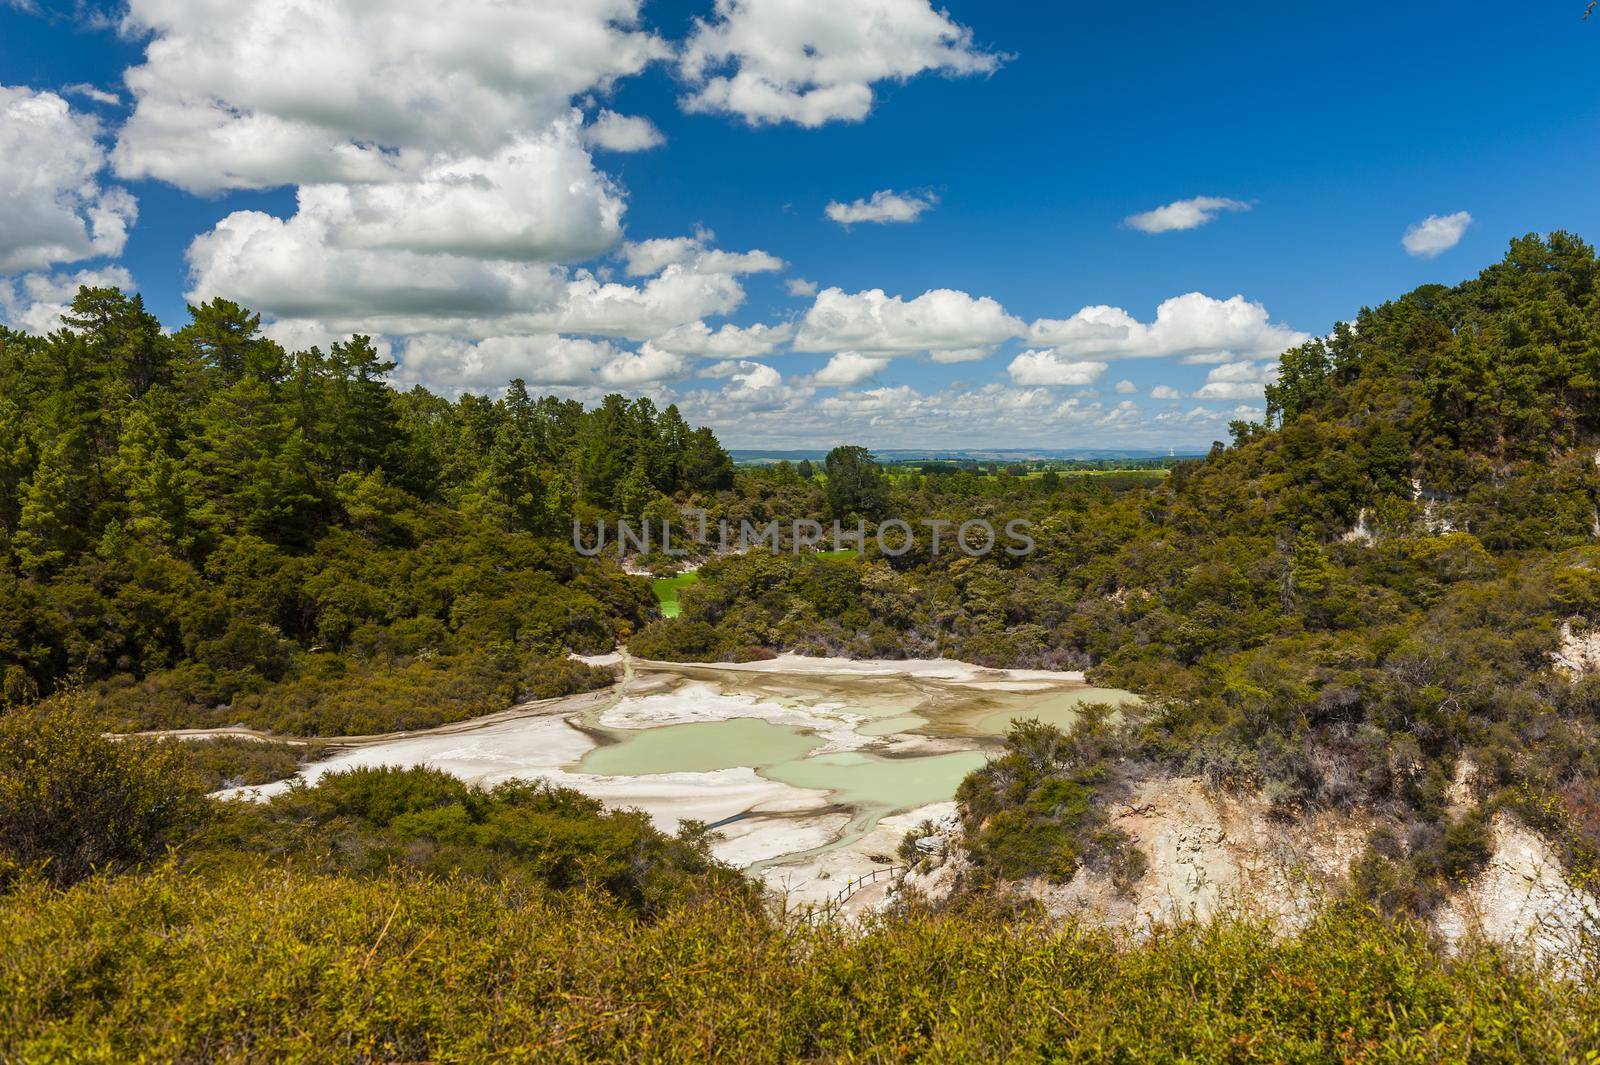 Turquoise Lake in Waiotapu thermal area in the New Zealand by fyletto